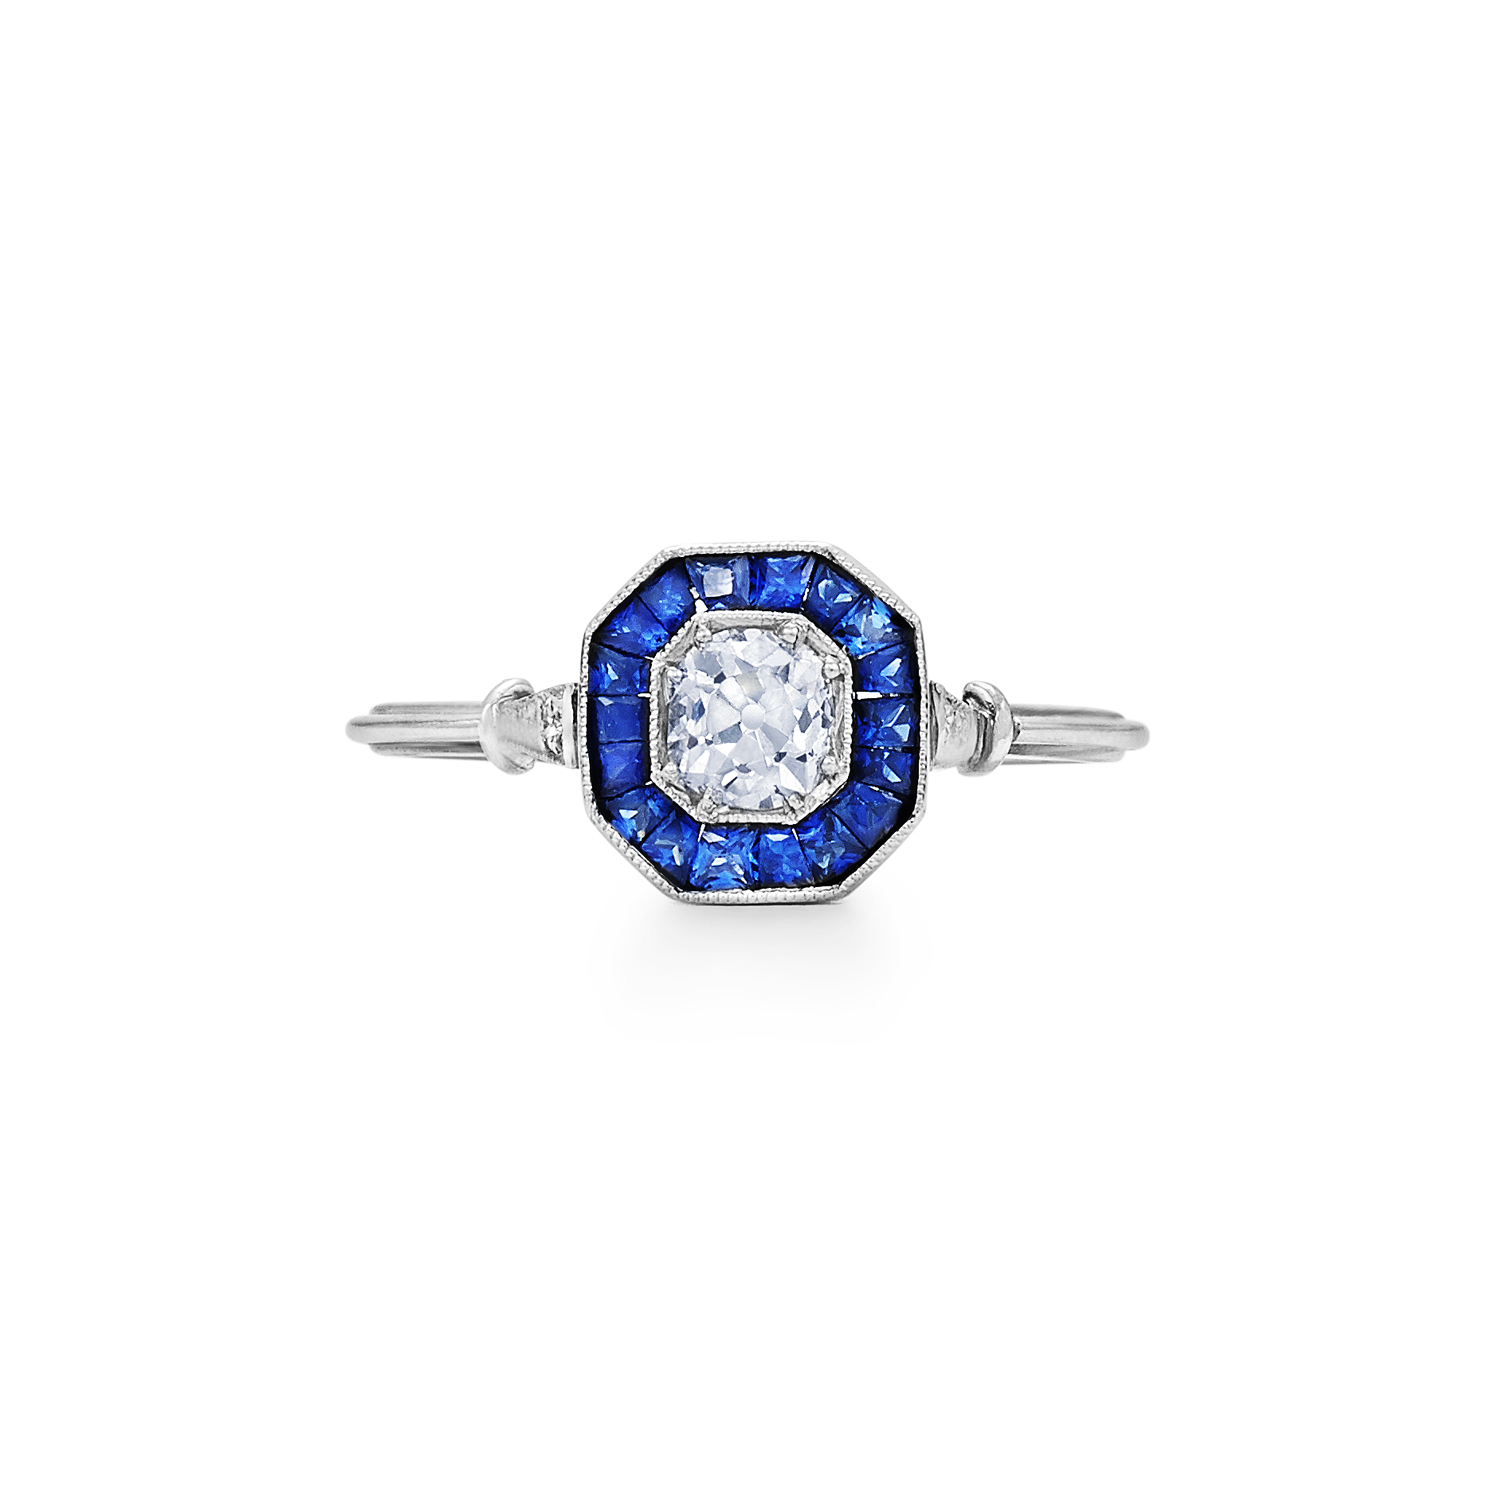 Old European Cut Diamond Engagement Ring with Sapphire Calibre Halo in Platinum, Style F-1028FLOE-0-DIASAP-PLAT